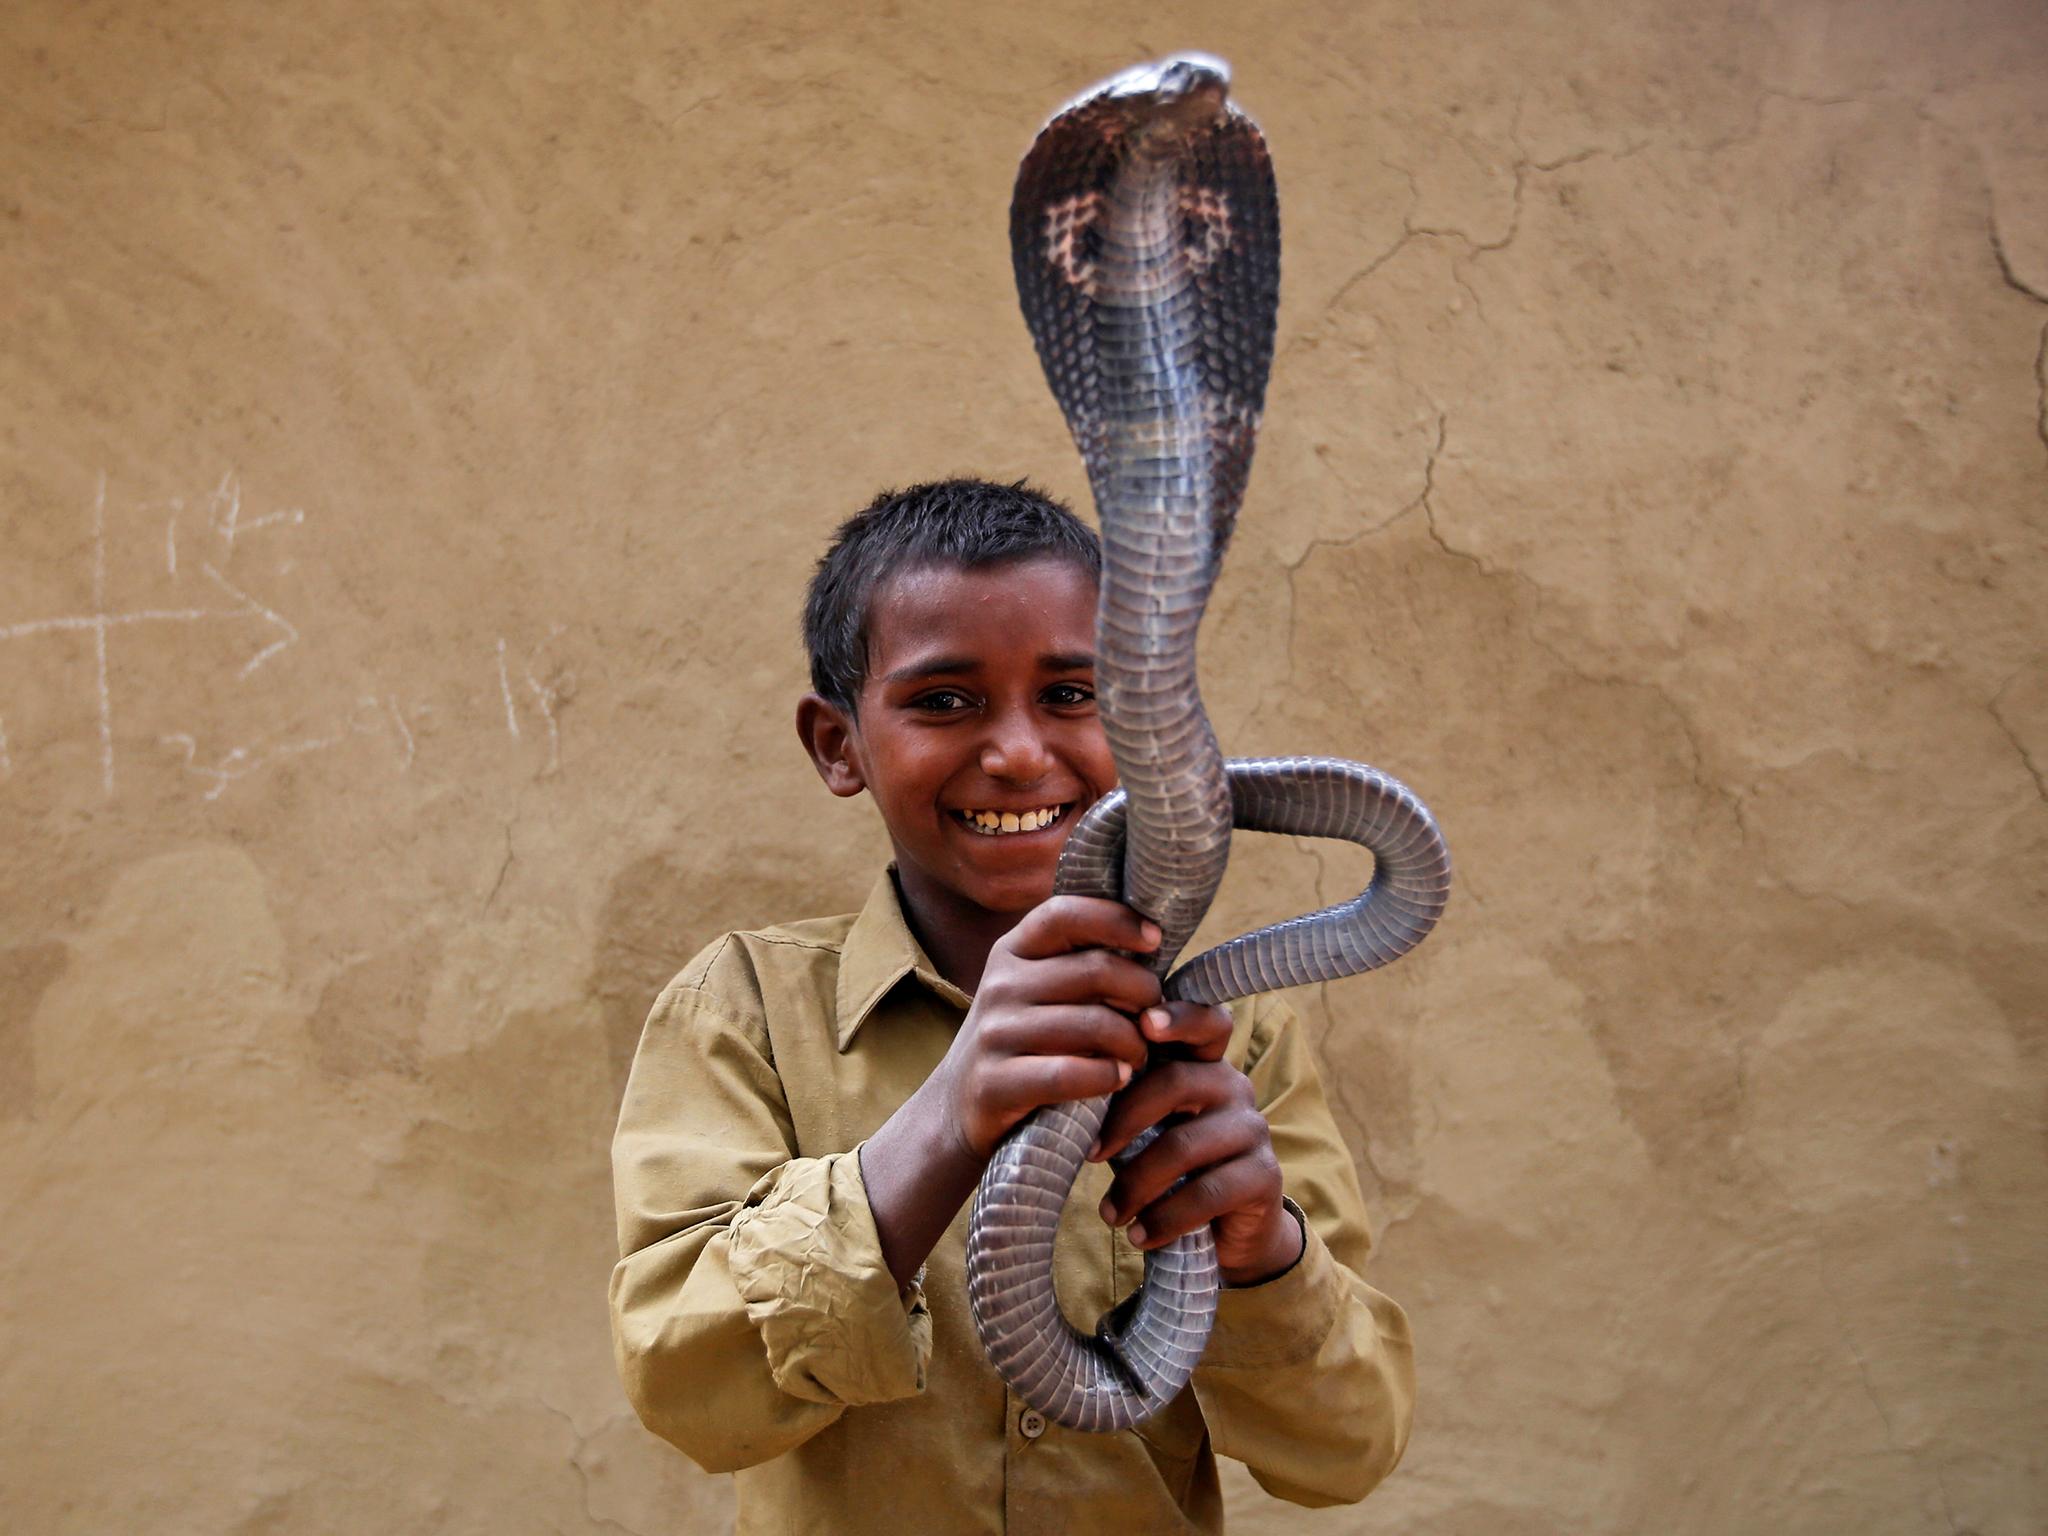 Ravi Nath poses for a photograph with a cobra snake in Jogi Dera (Snake charmers settlement), in the village of Baghpur, in the central state of Uttar Pradesh, India